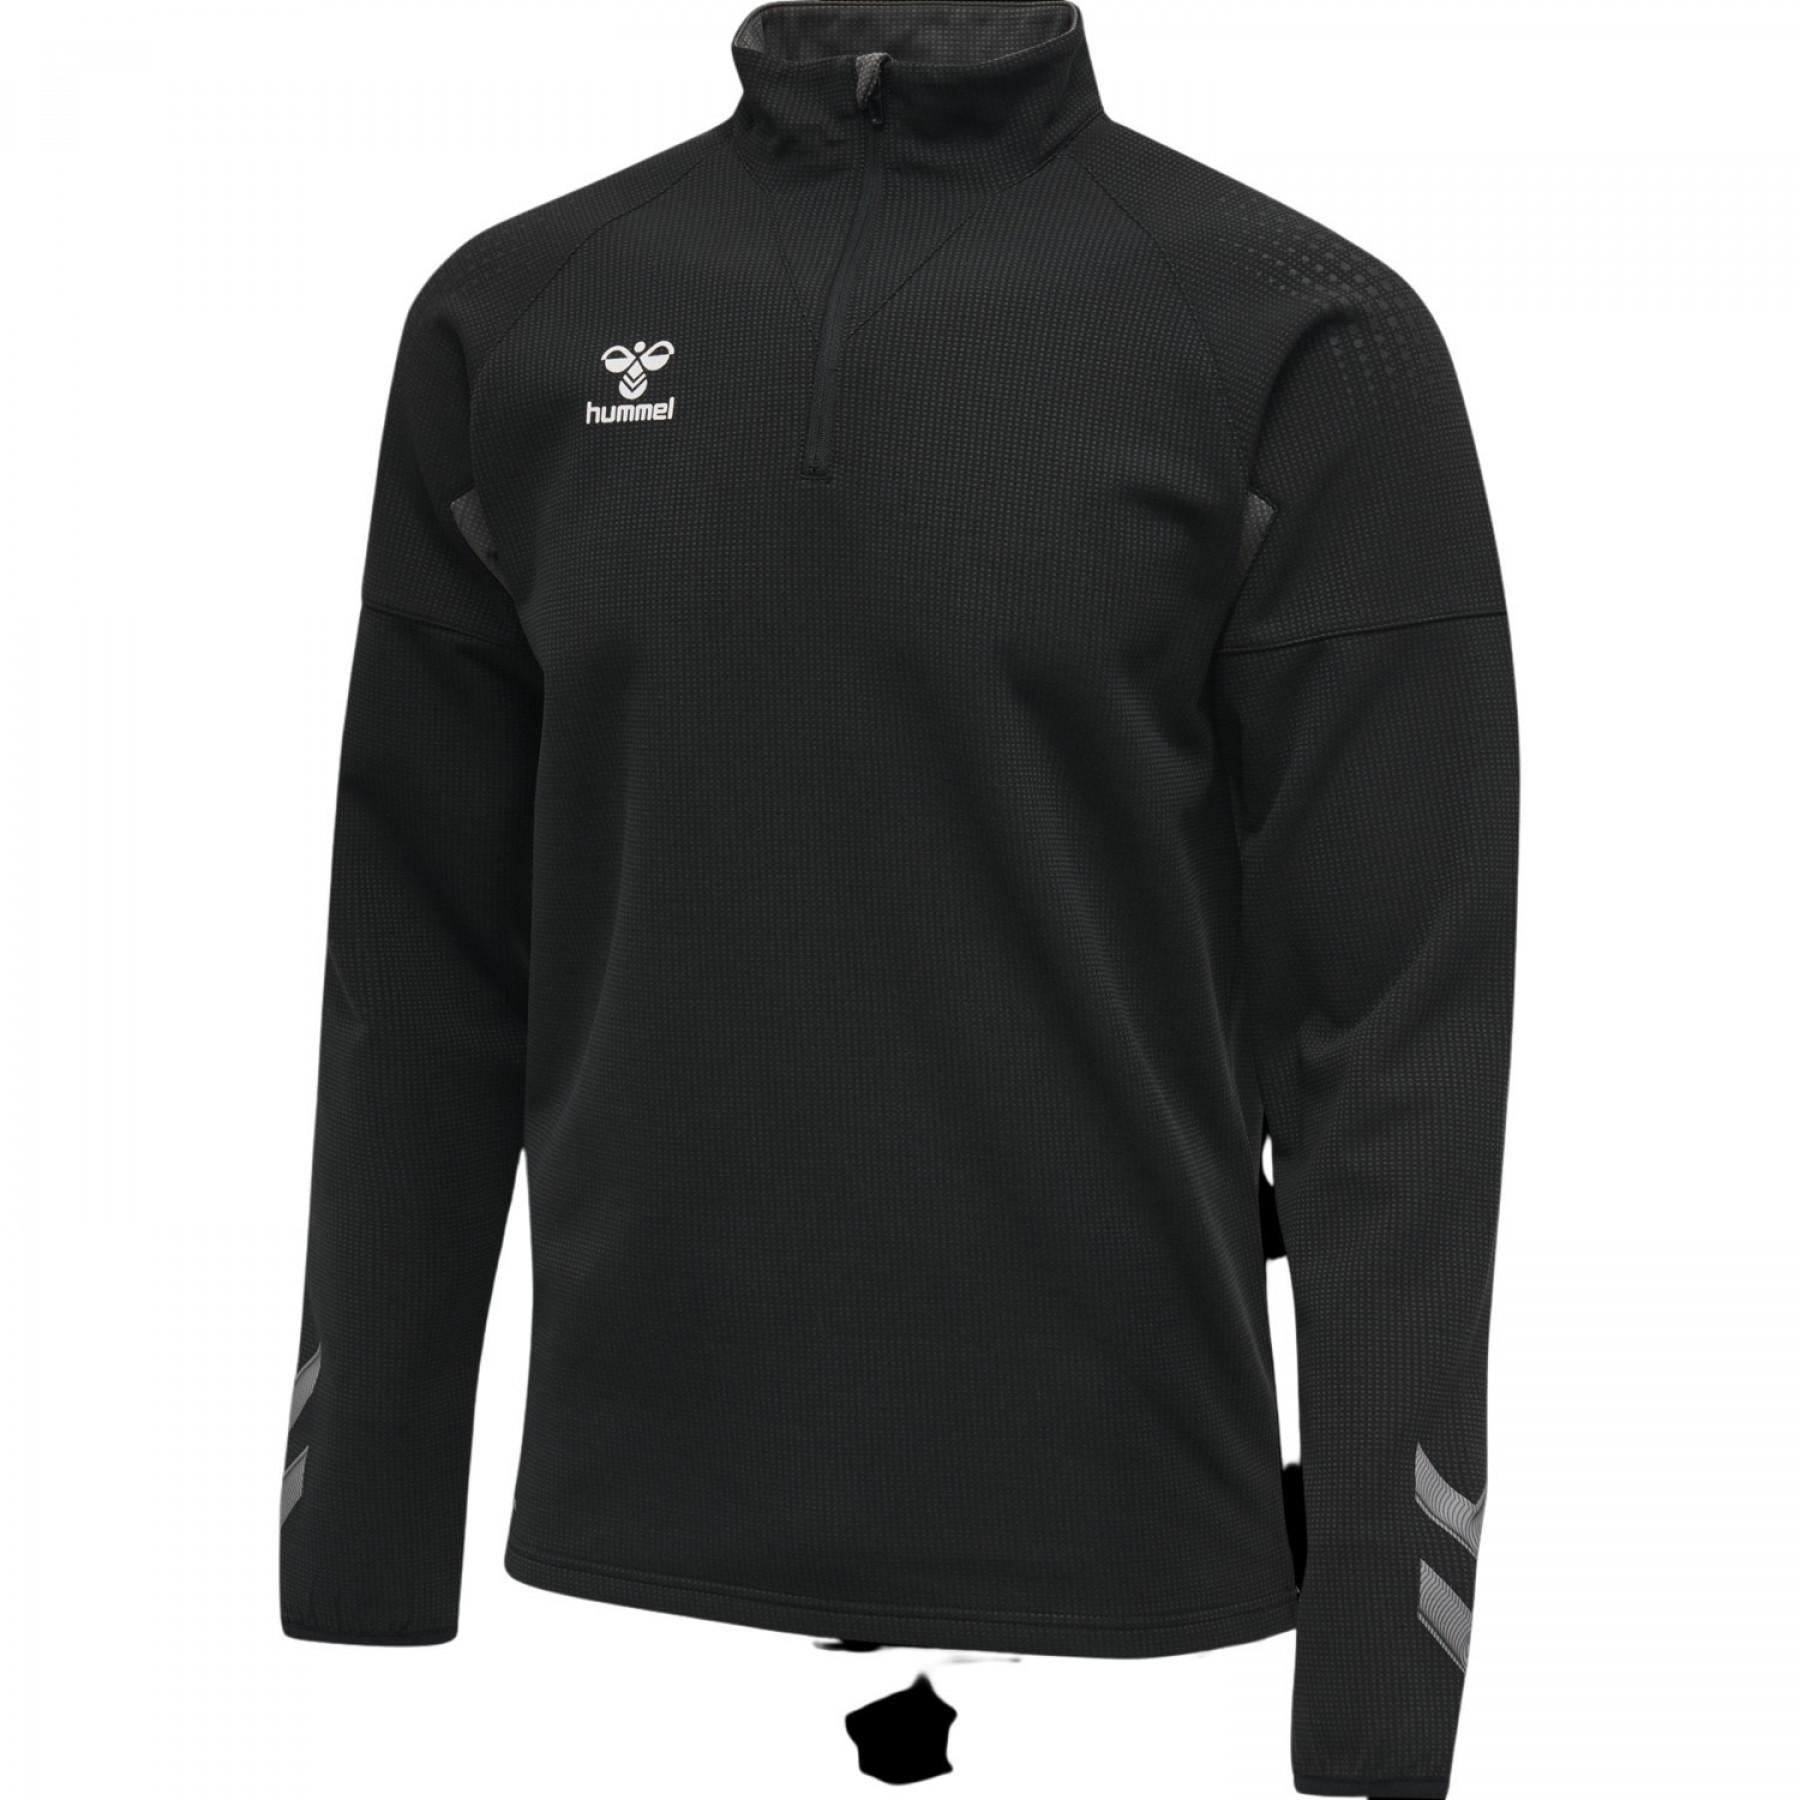 Jacket PRO HALF Hummel - Jackets and tracksuits - Textile - Volleyball wear